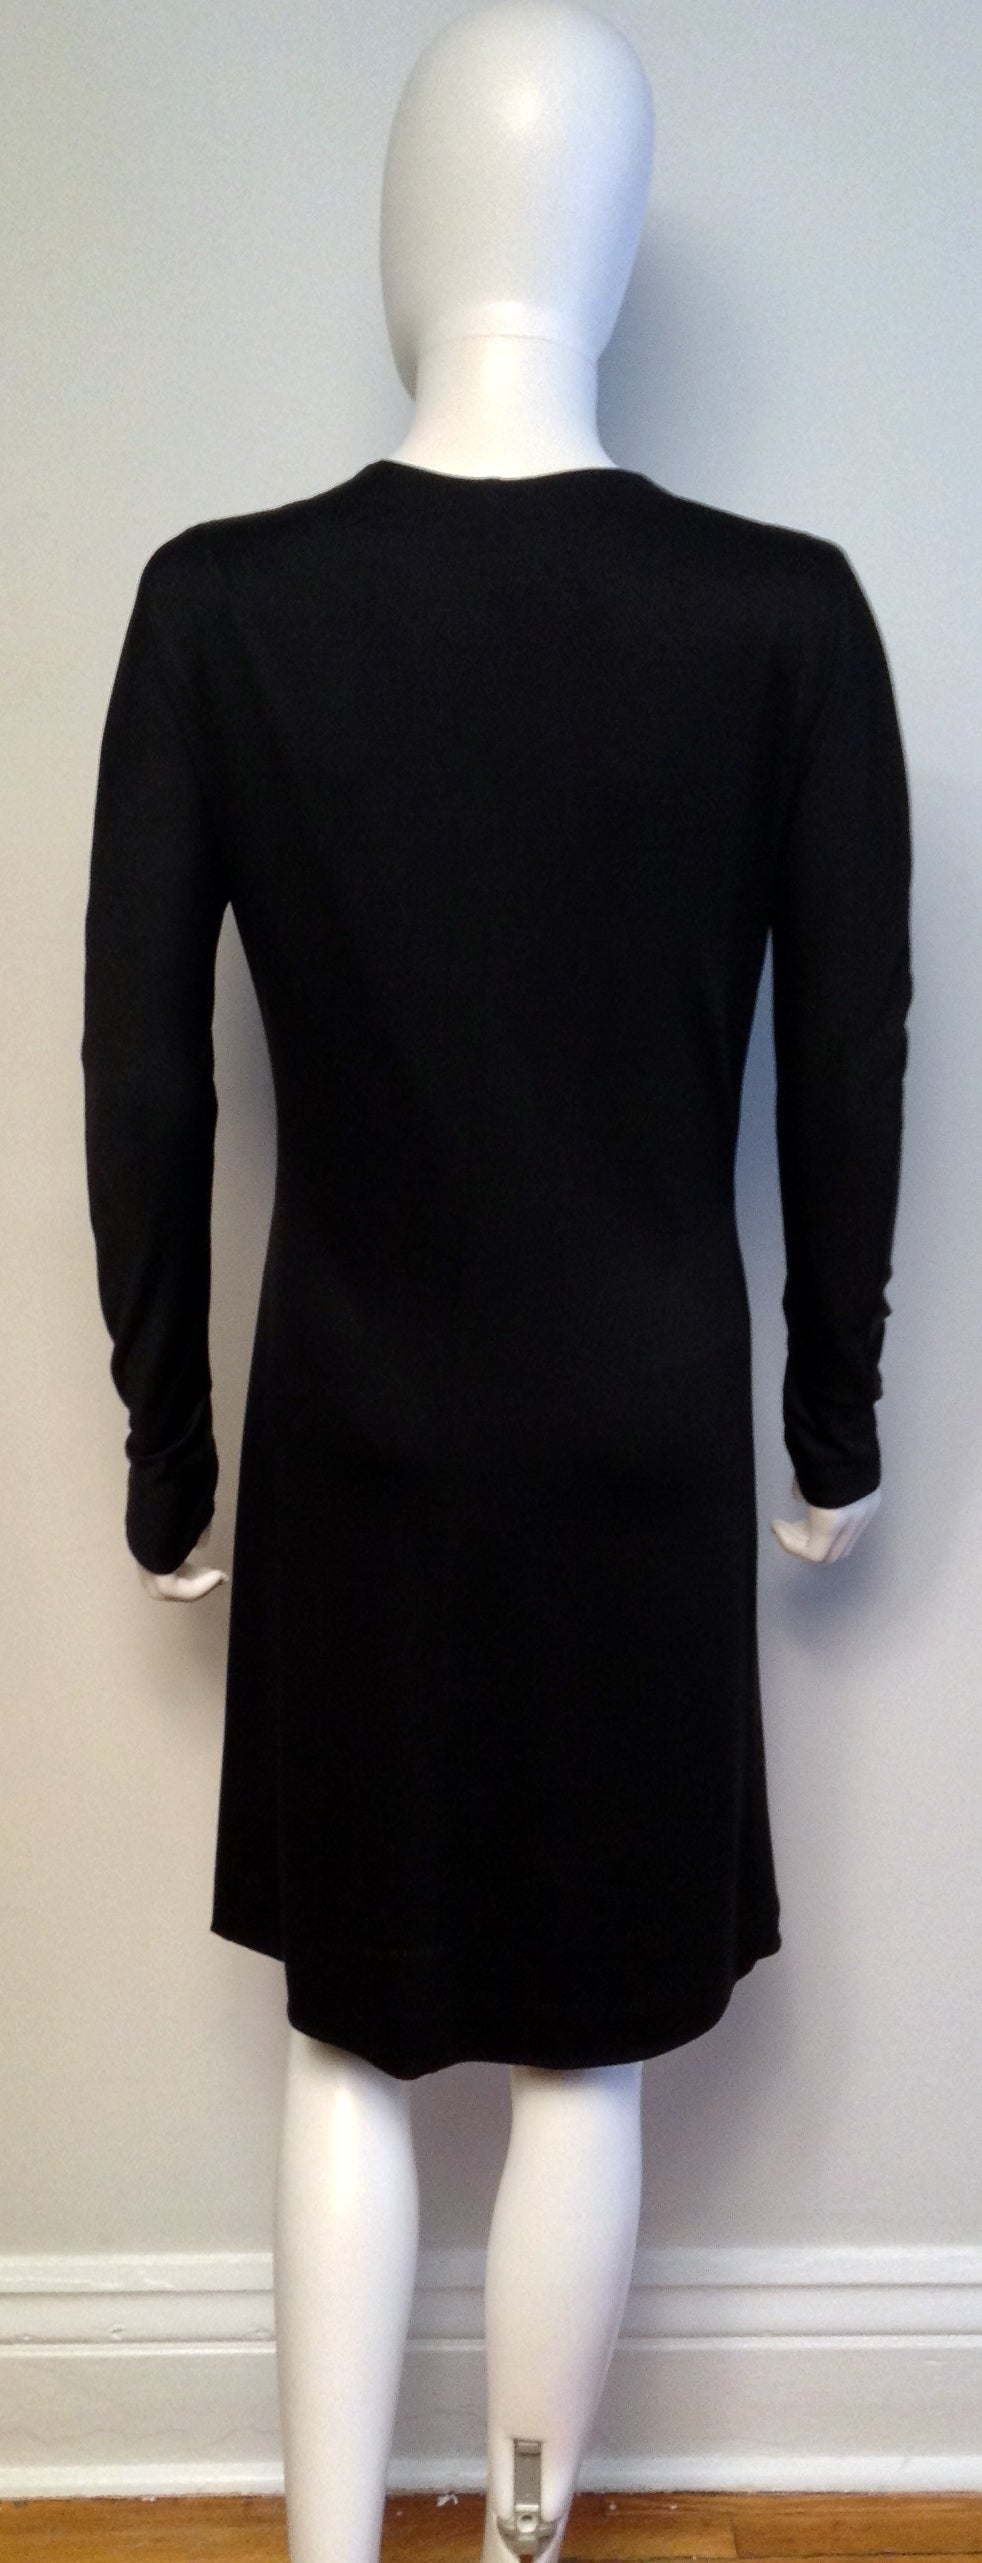 Tom Ford Gucci Black Silk Jersey dress with Gold Tiger Size IT40/8 For Sale 4